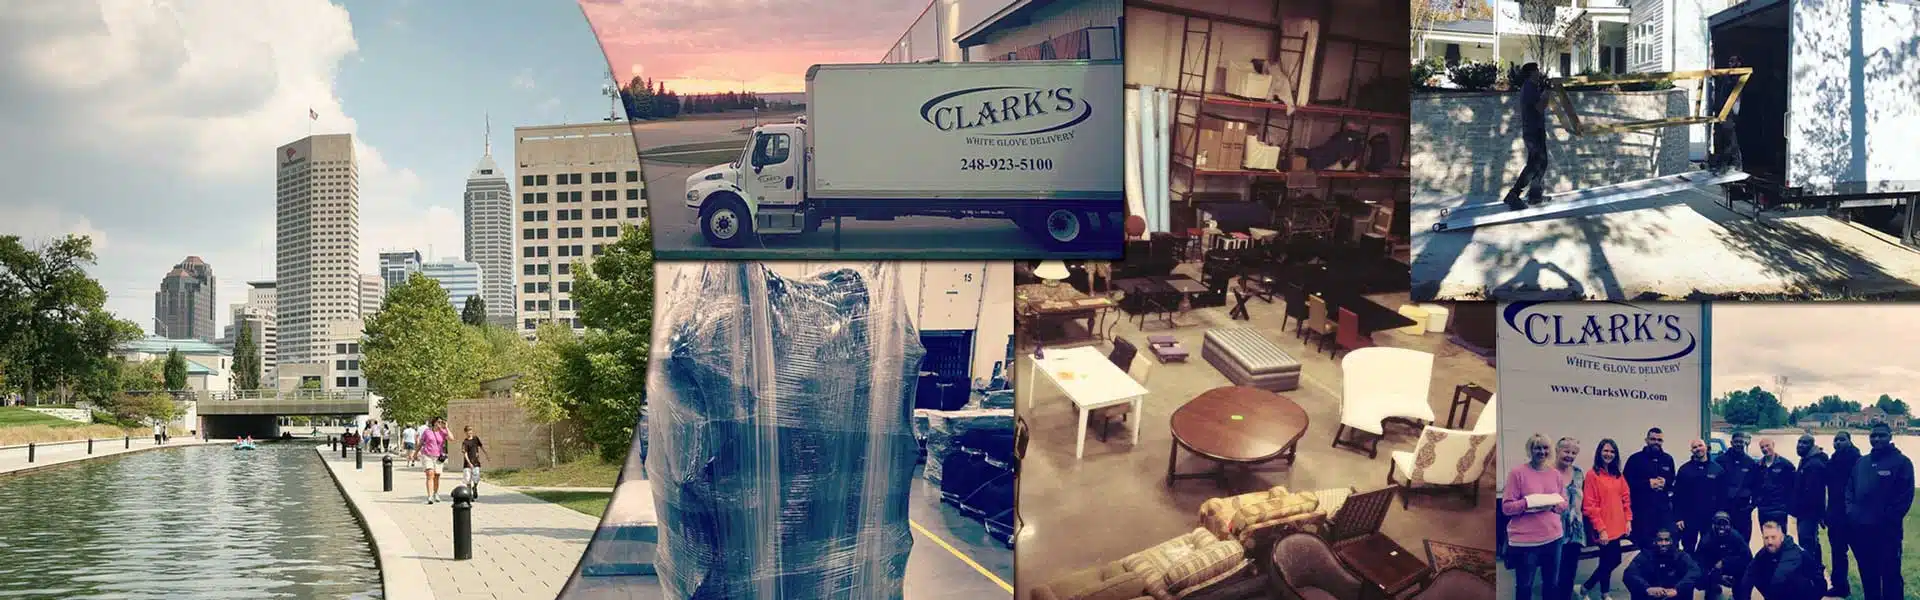 Clarks White Glove Delivery